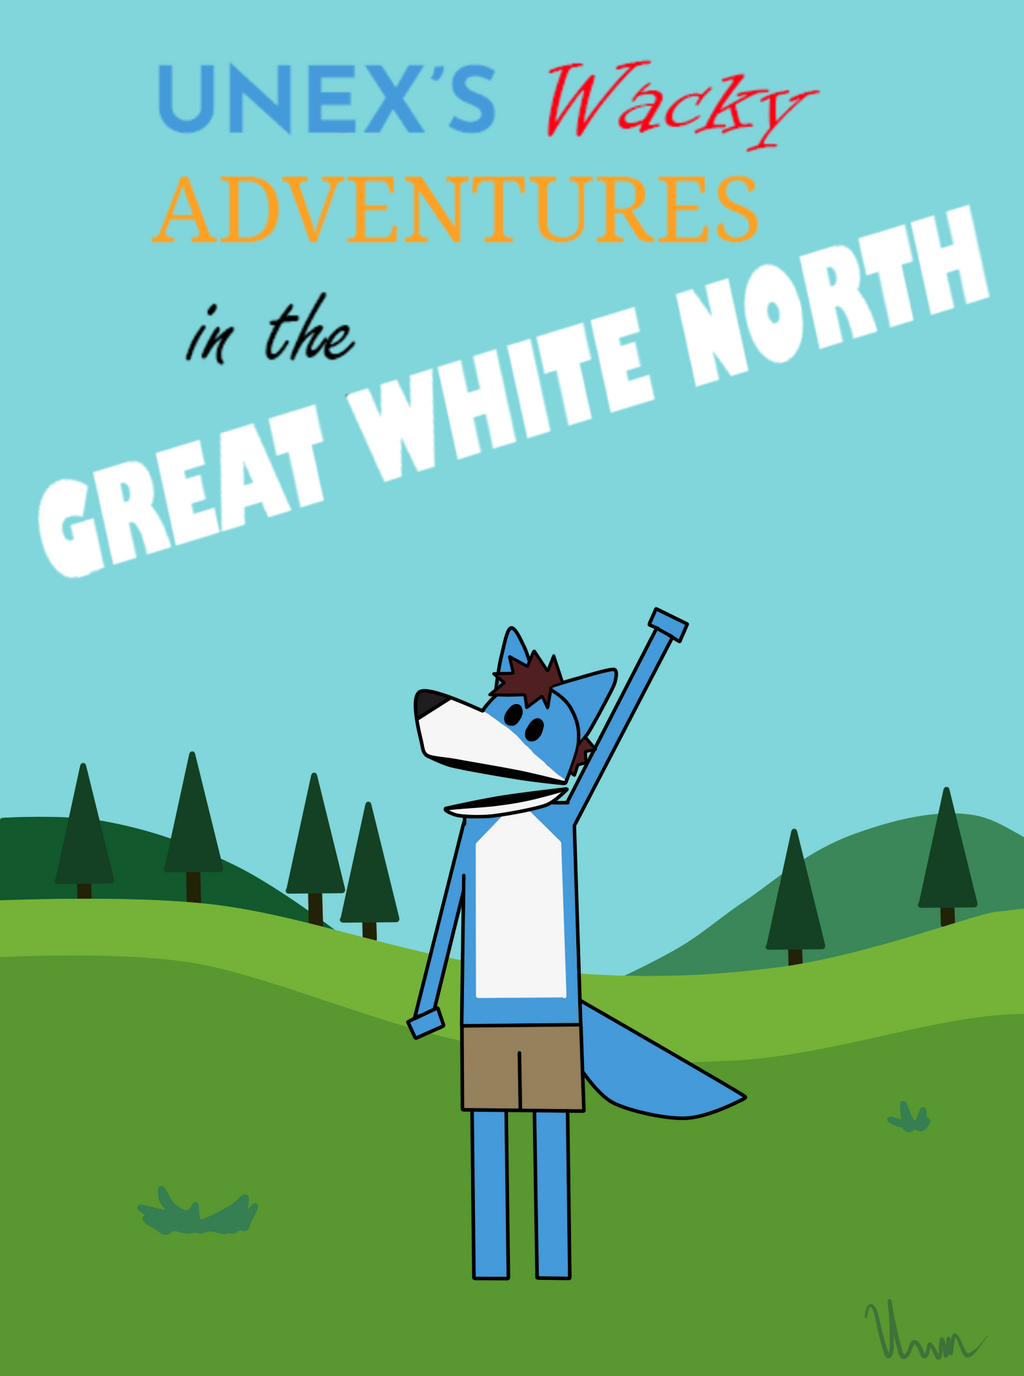 Unex's Wacky Adventures in the Great White North